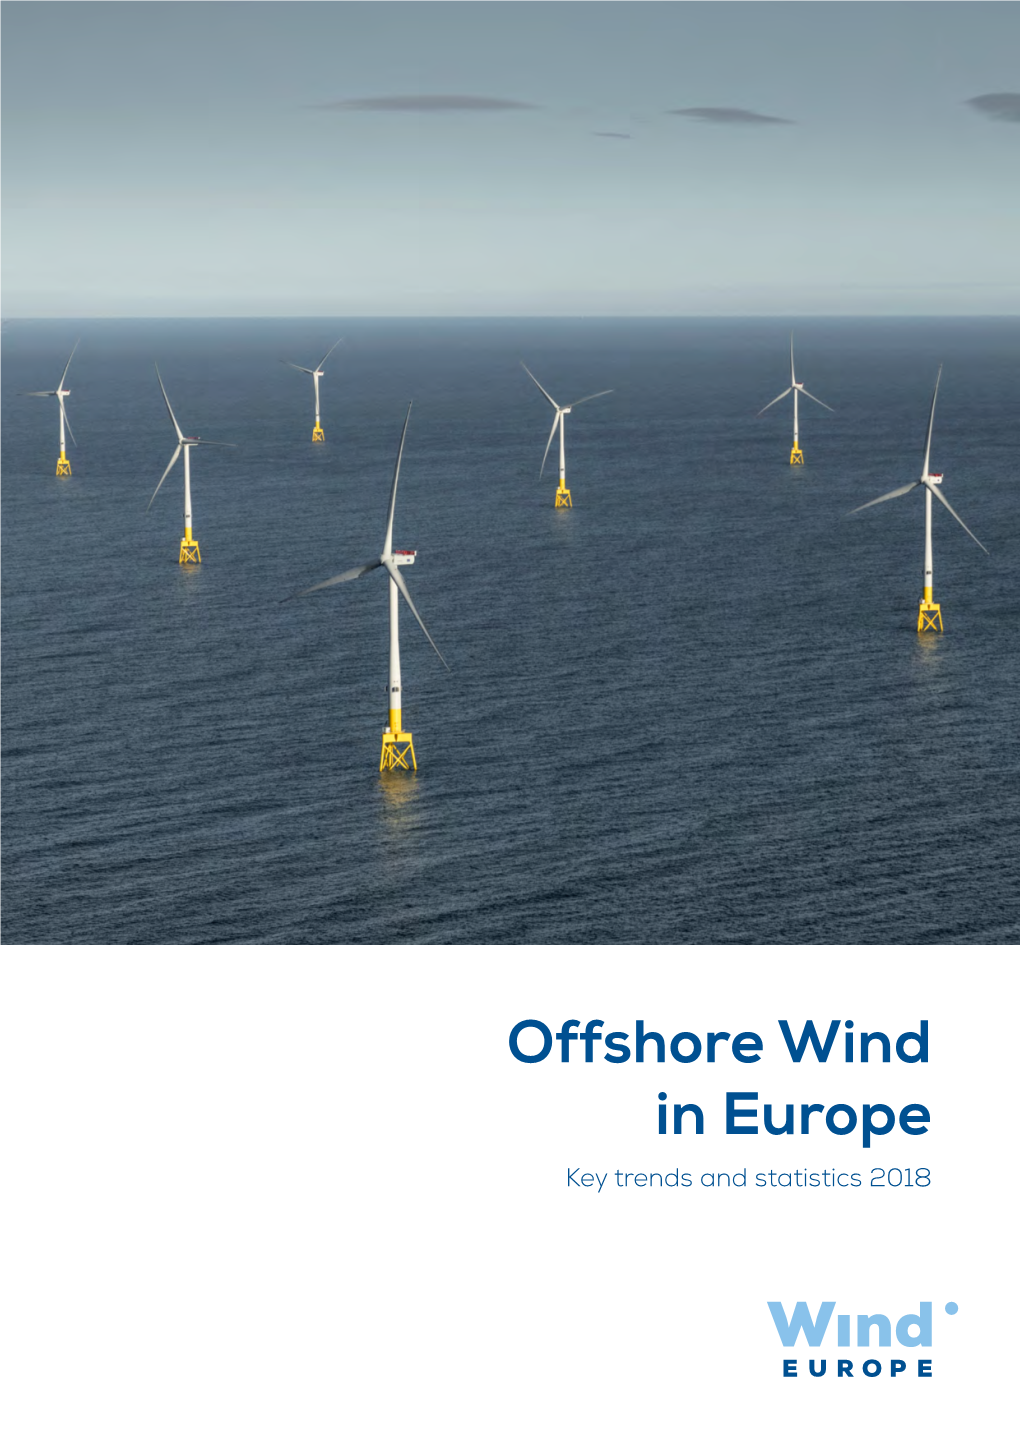 Offshore Wind in Europe Key Trends and Statistics 2018